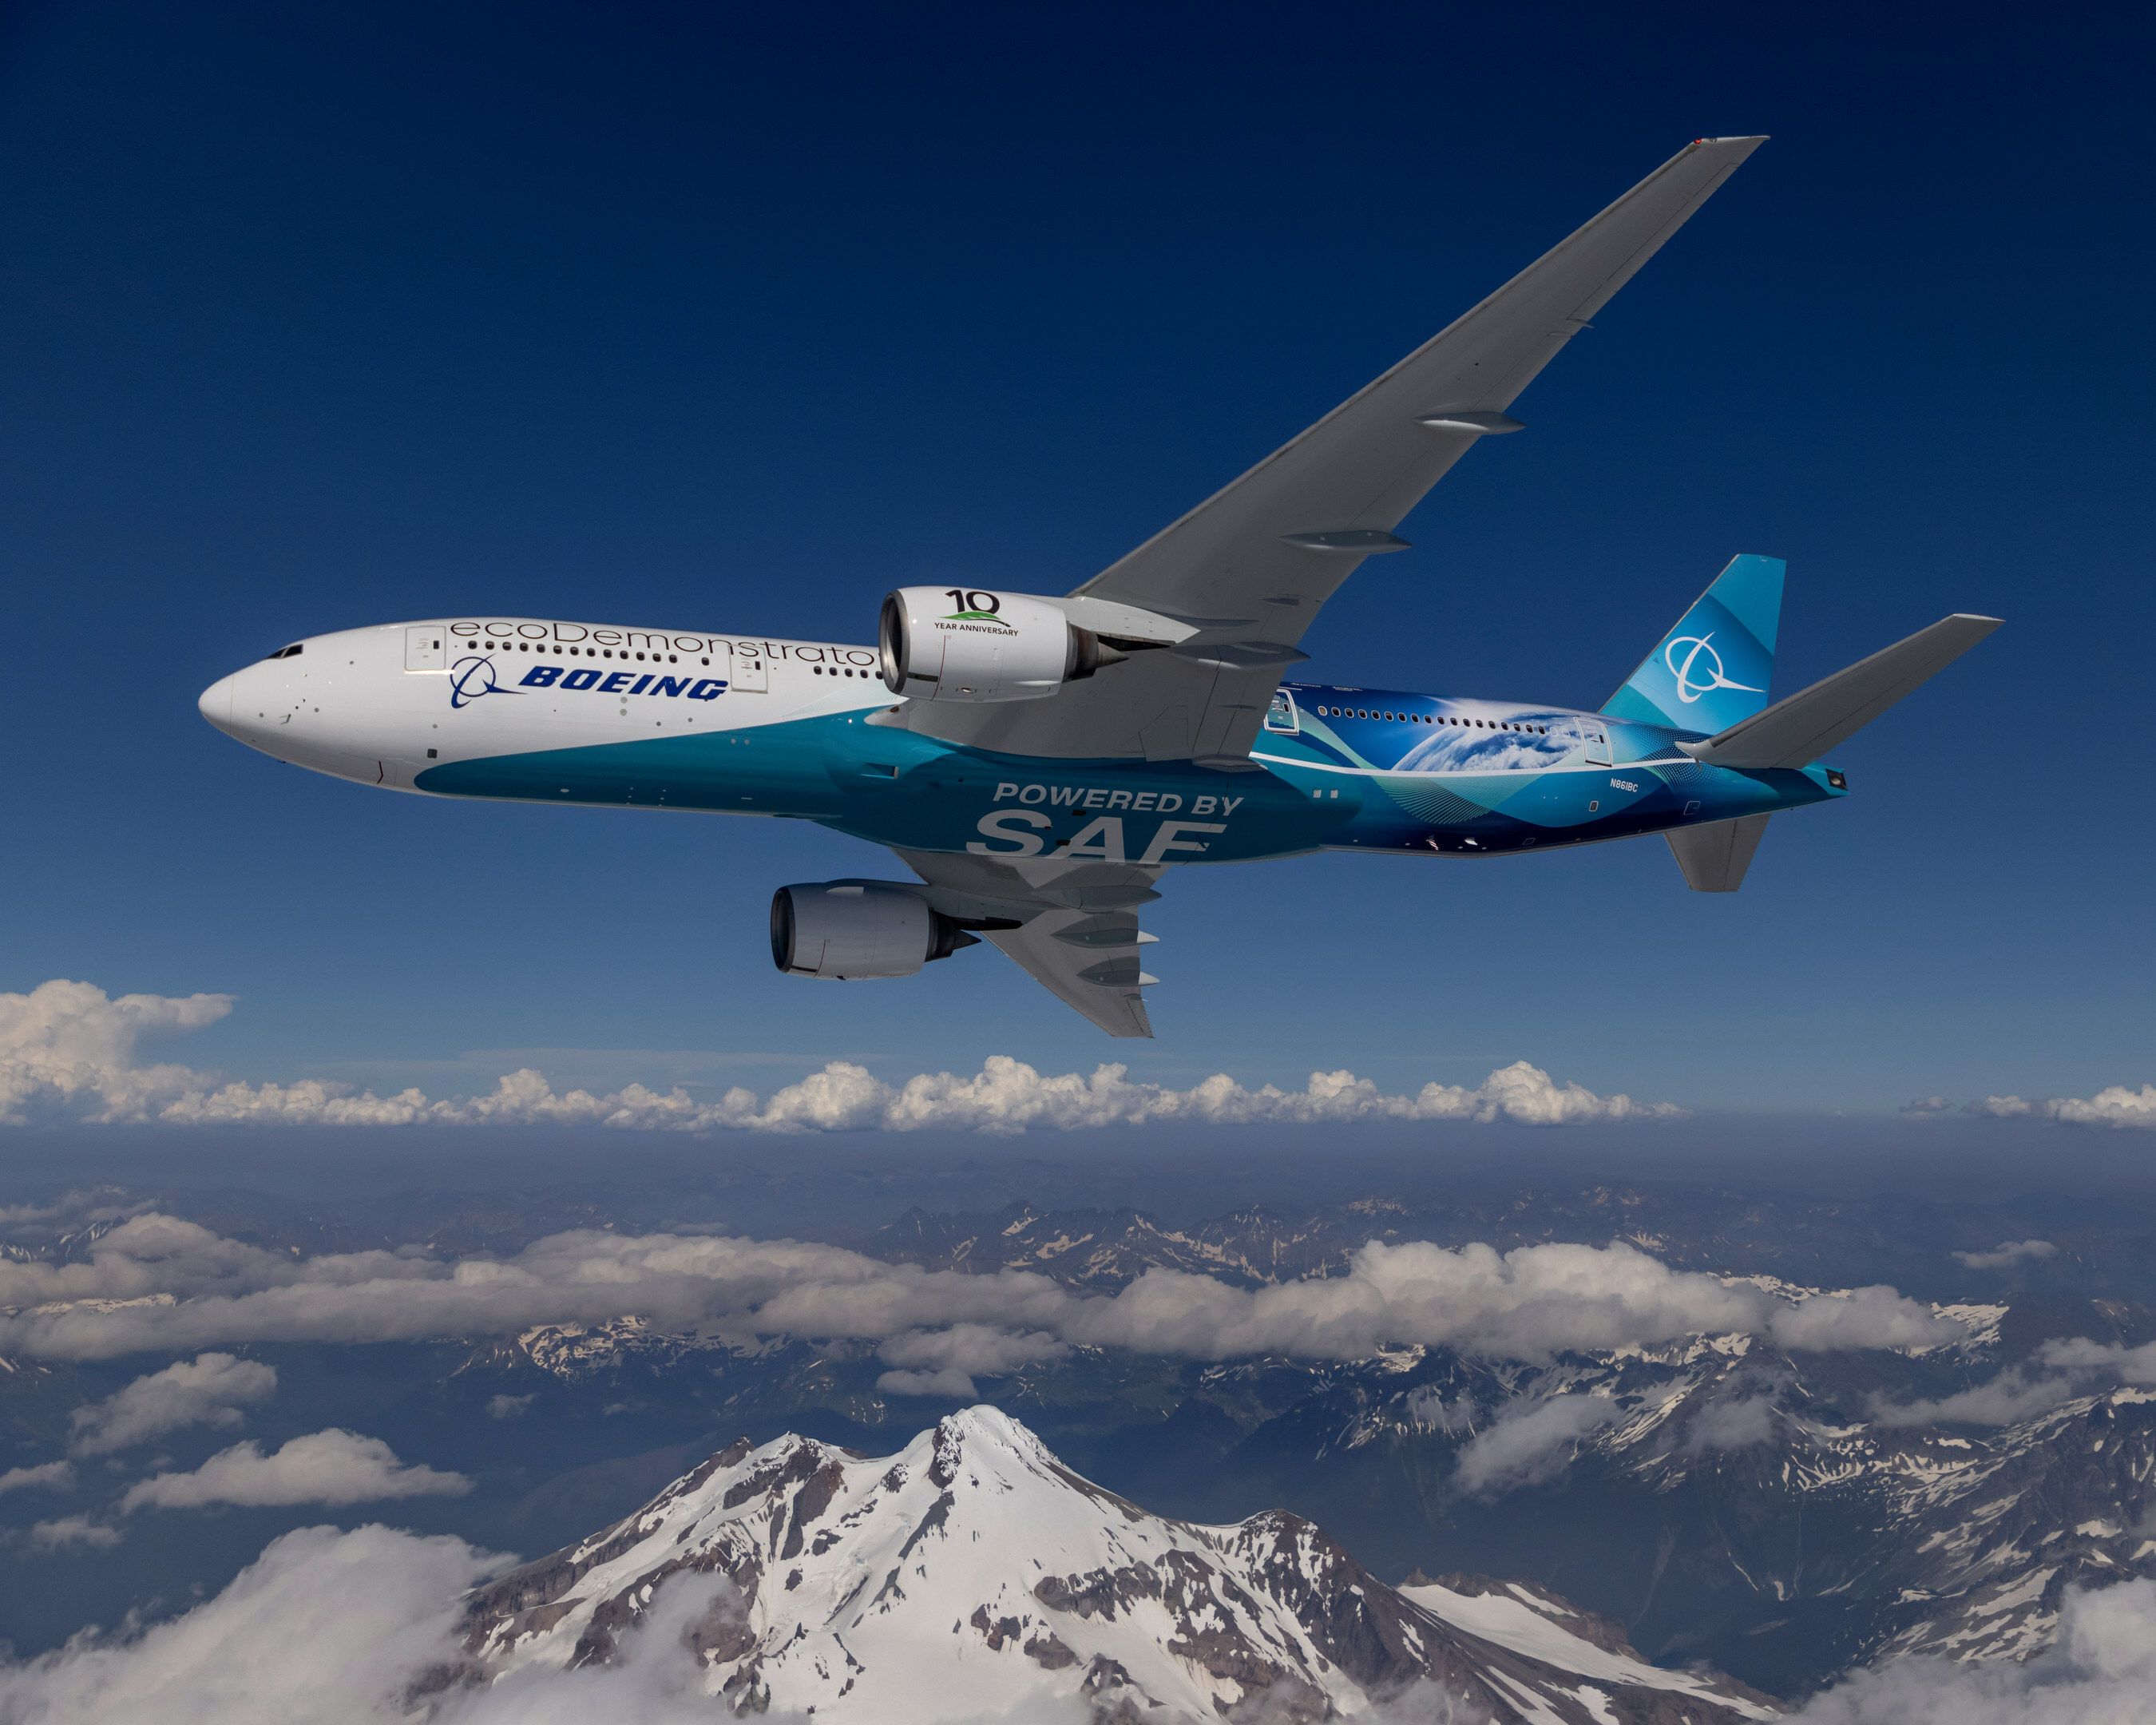 Boeing ecodemonstrator plane with SAF logo in the sky over mountains